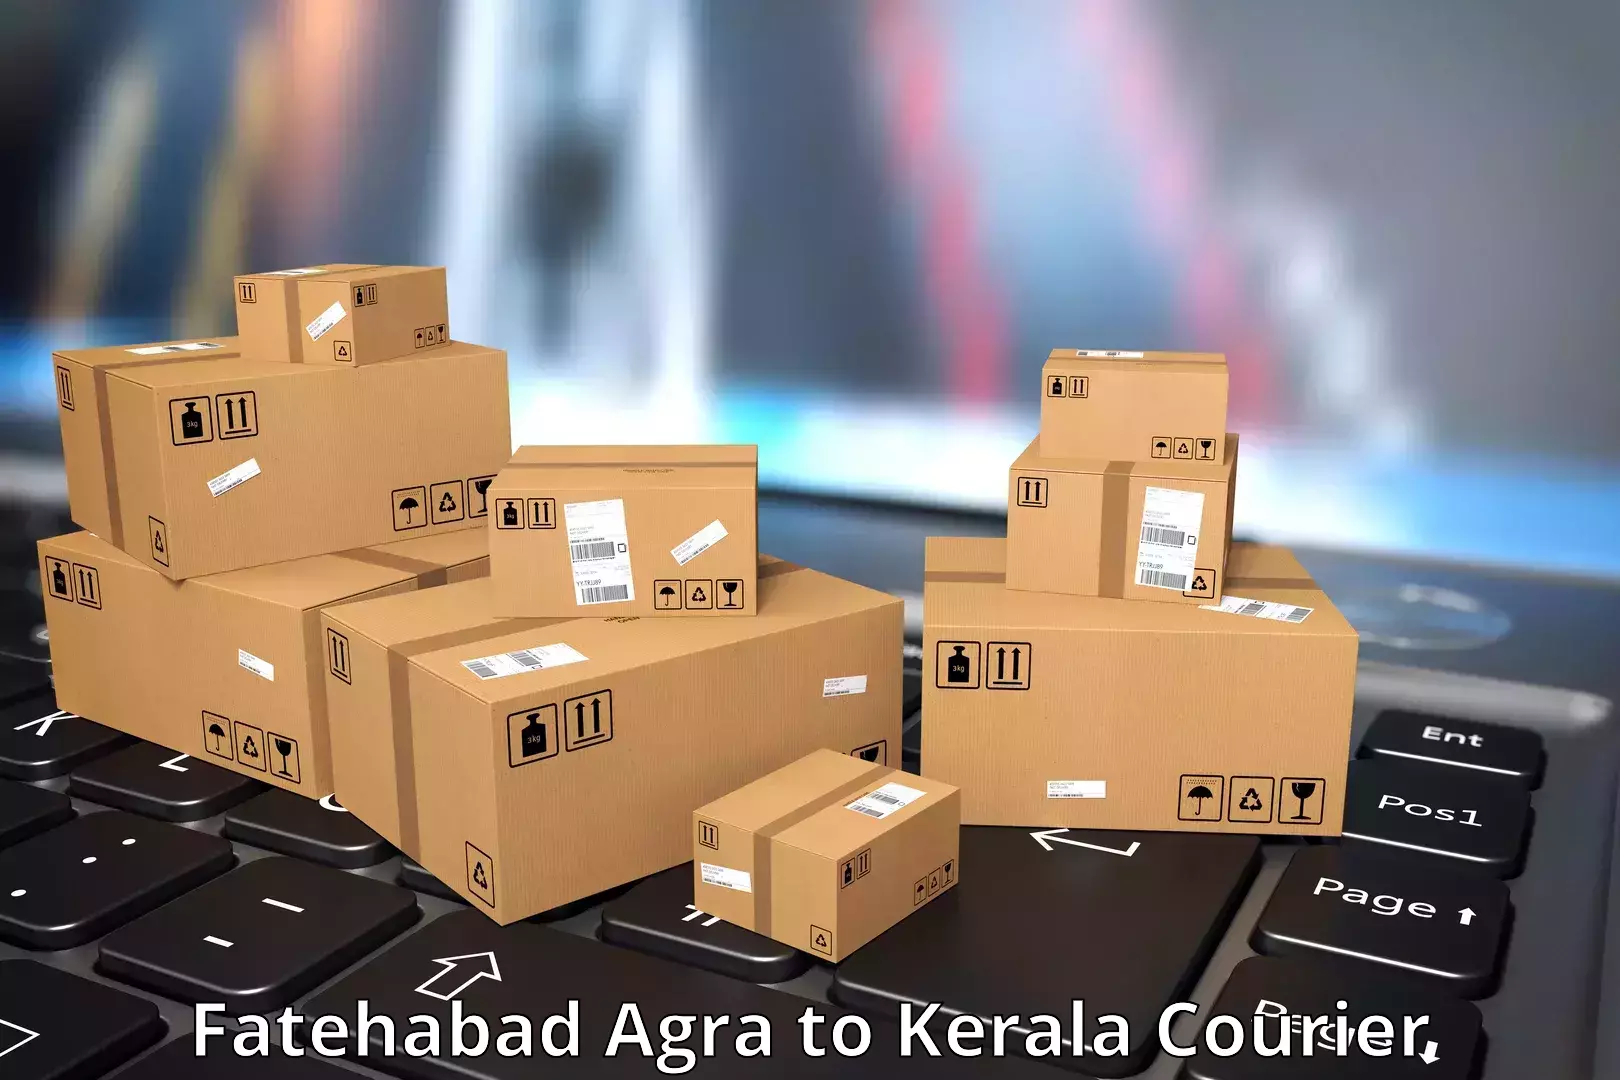 Global courier networks Fatehabad Agra to Pazhayannur